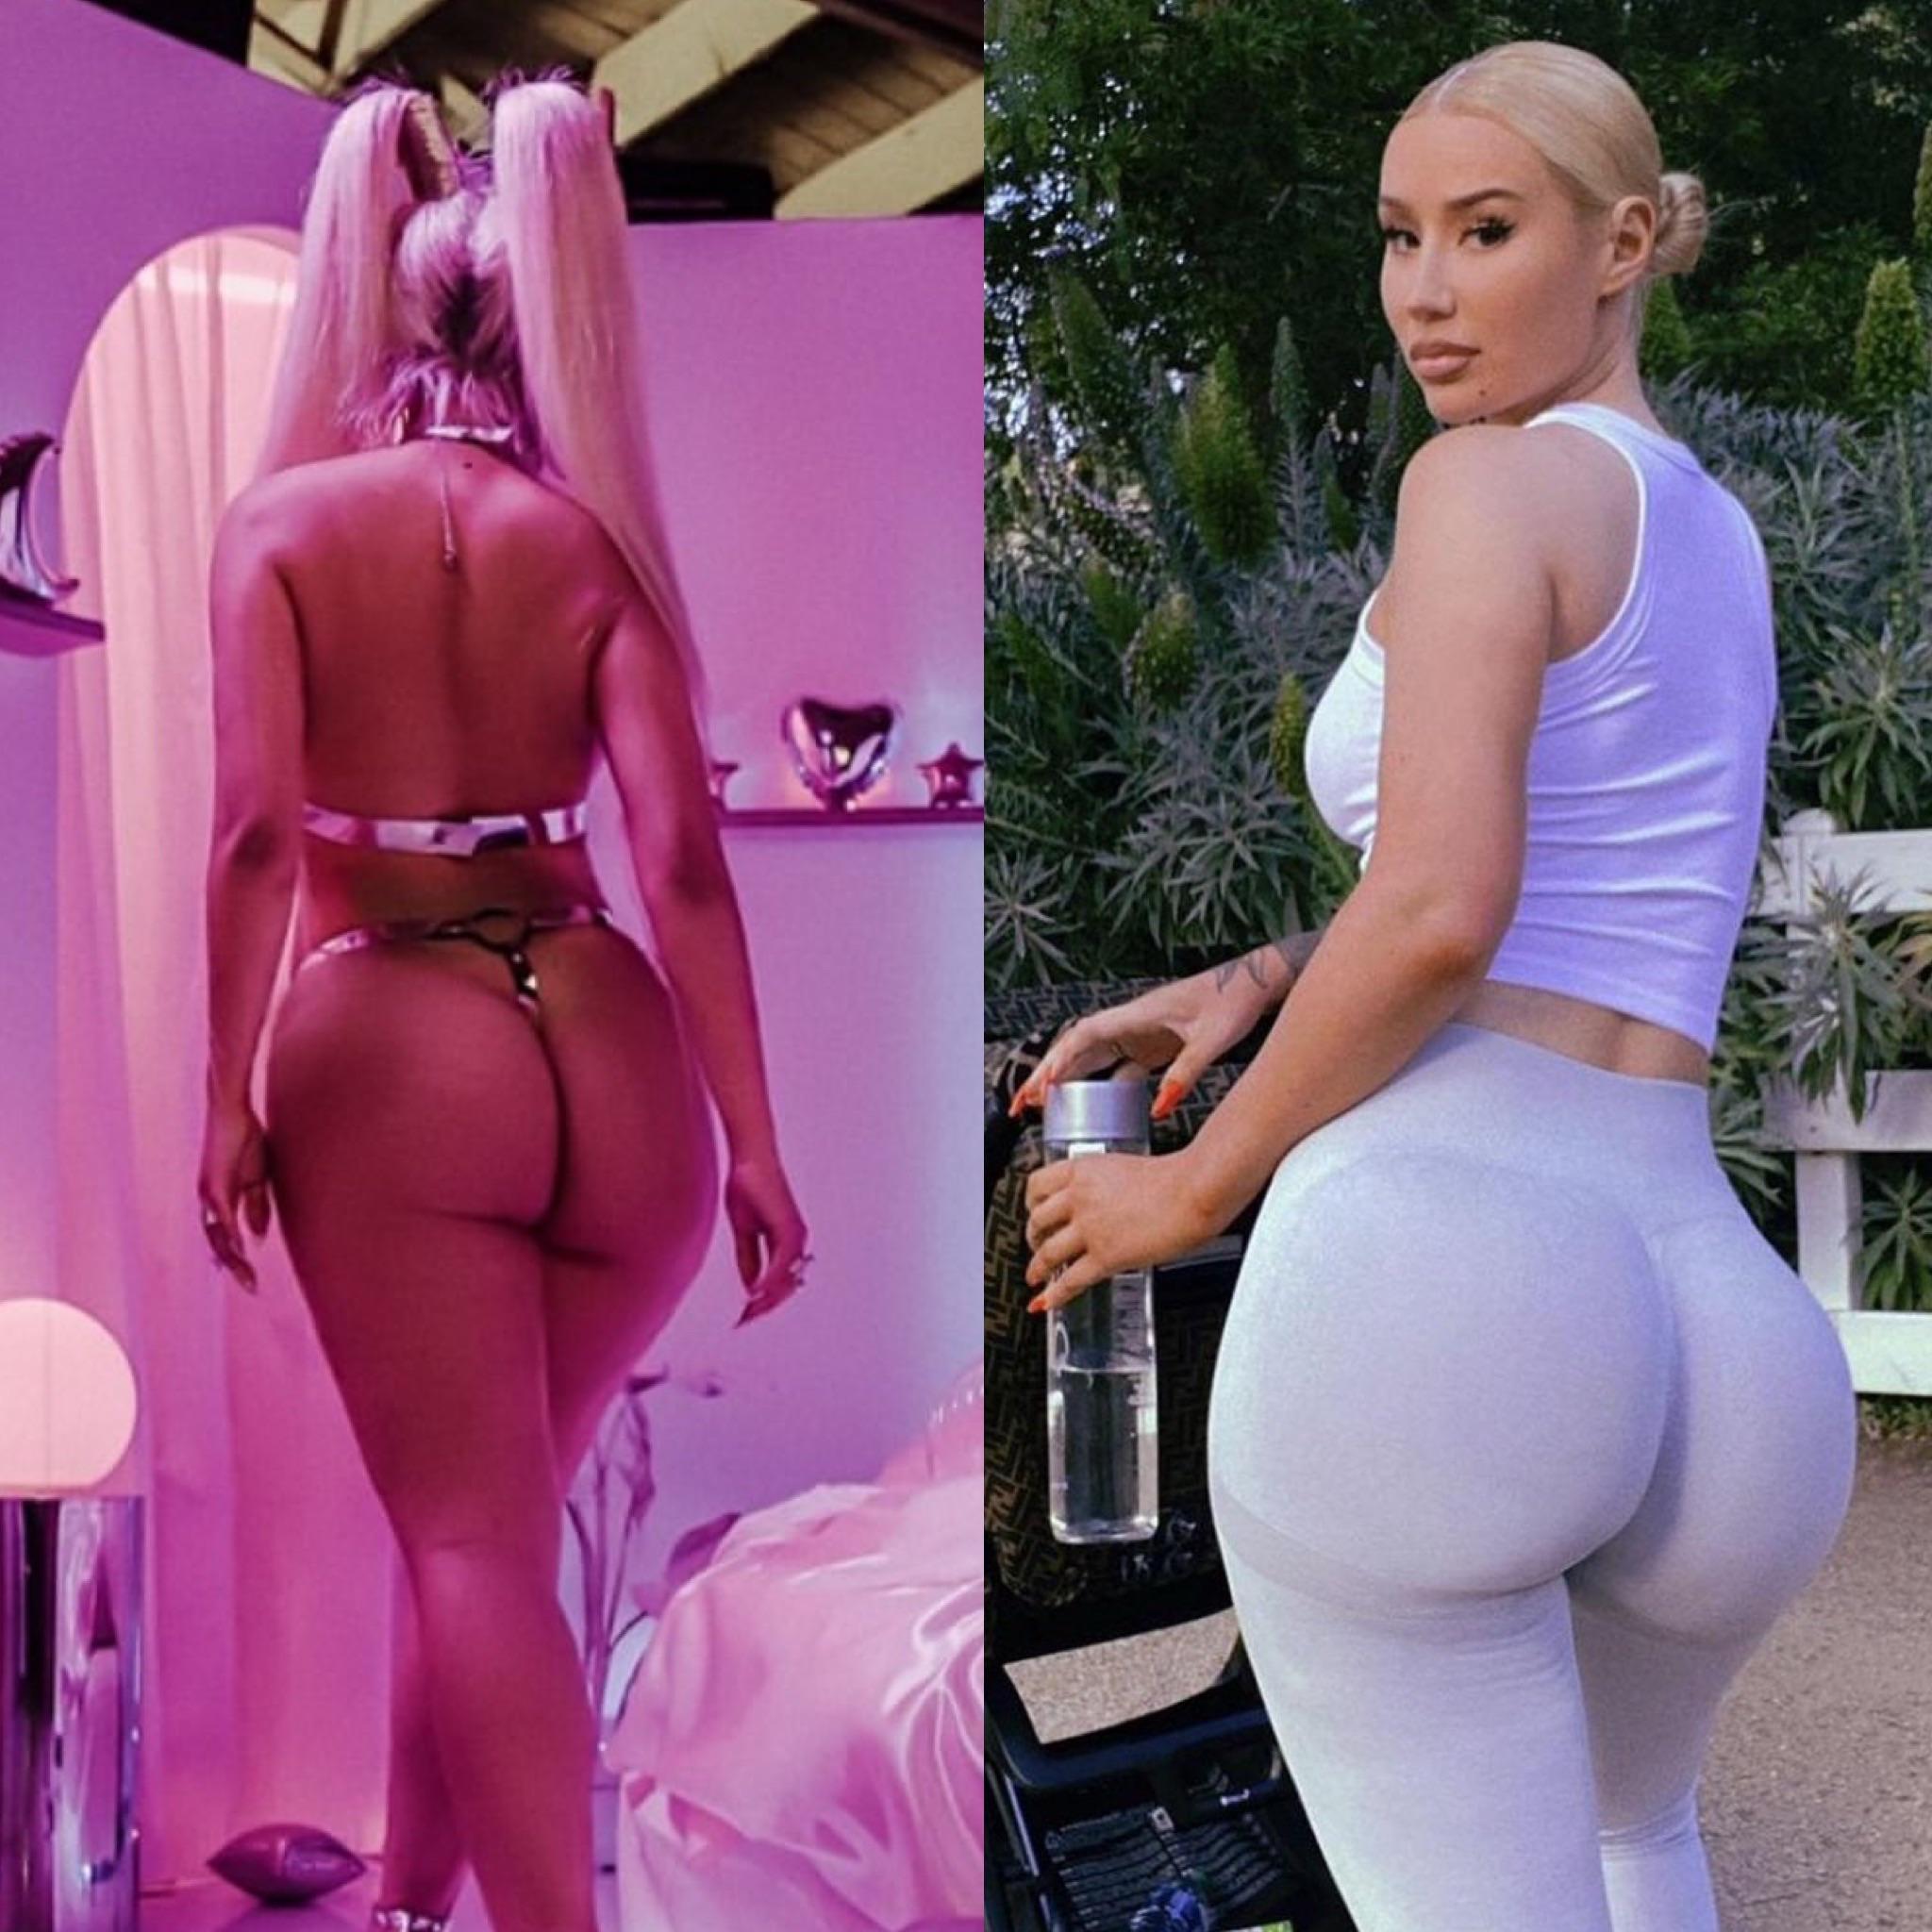 Whos ass are you gonna fuck Doja Cat or Iggy